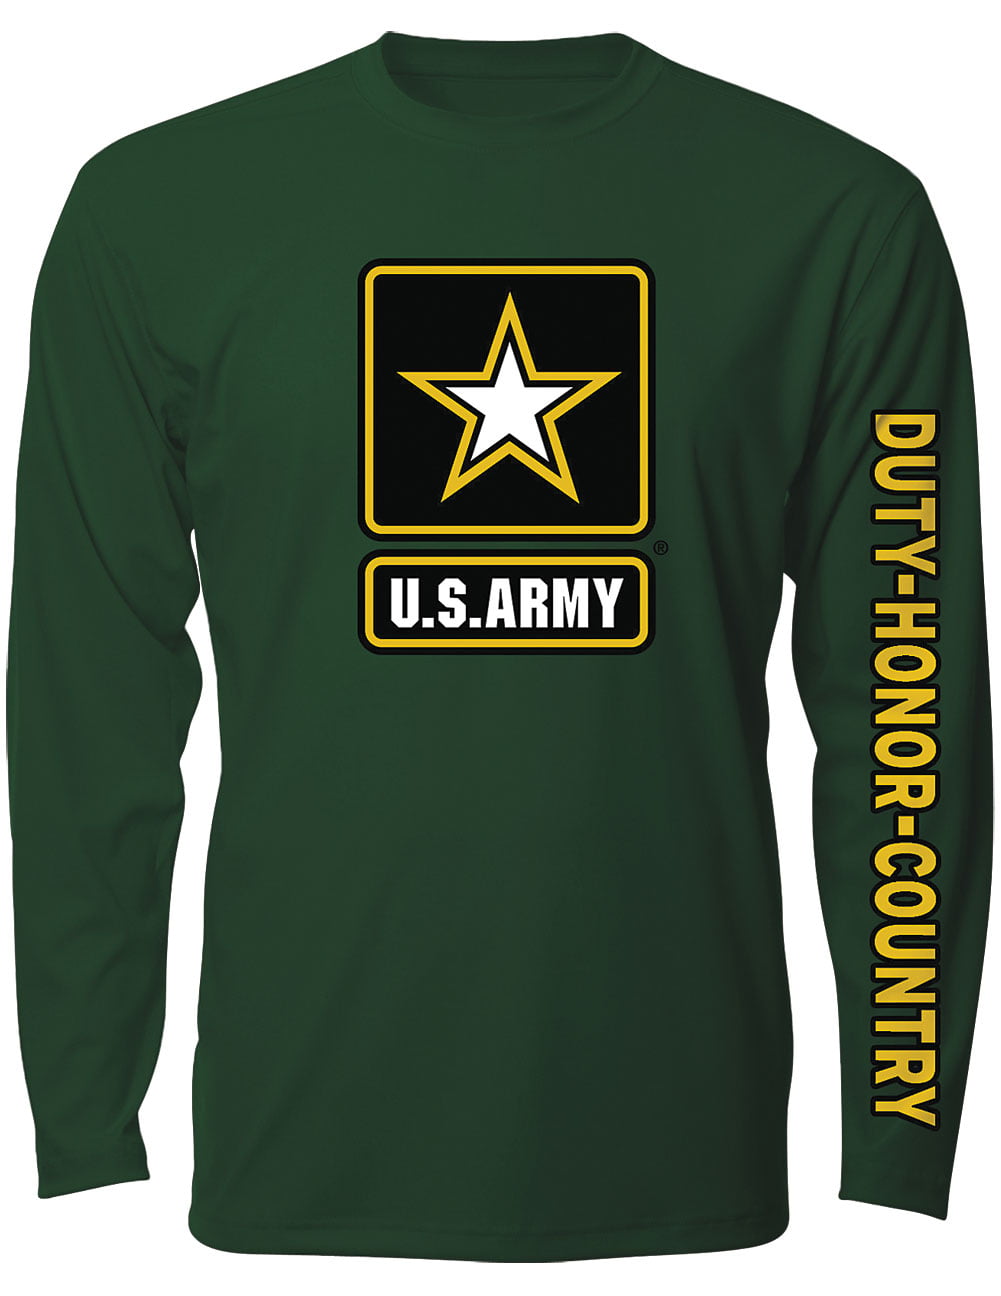 Army Navy Game Shirts 2021 - Army Military